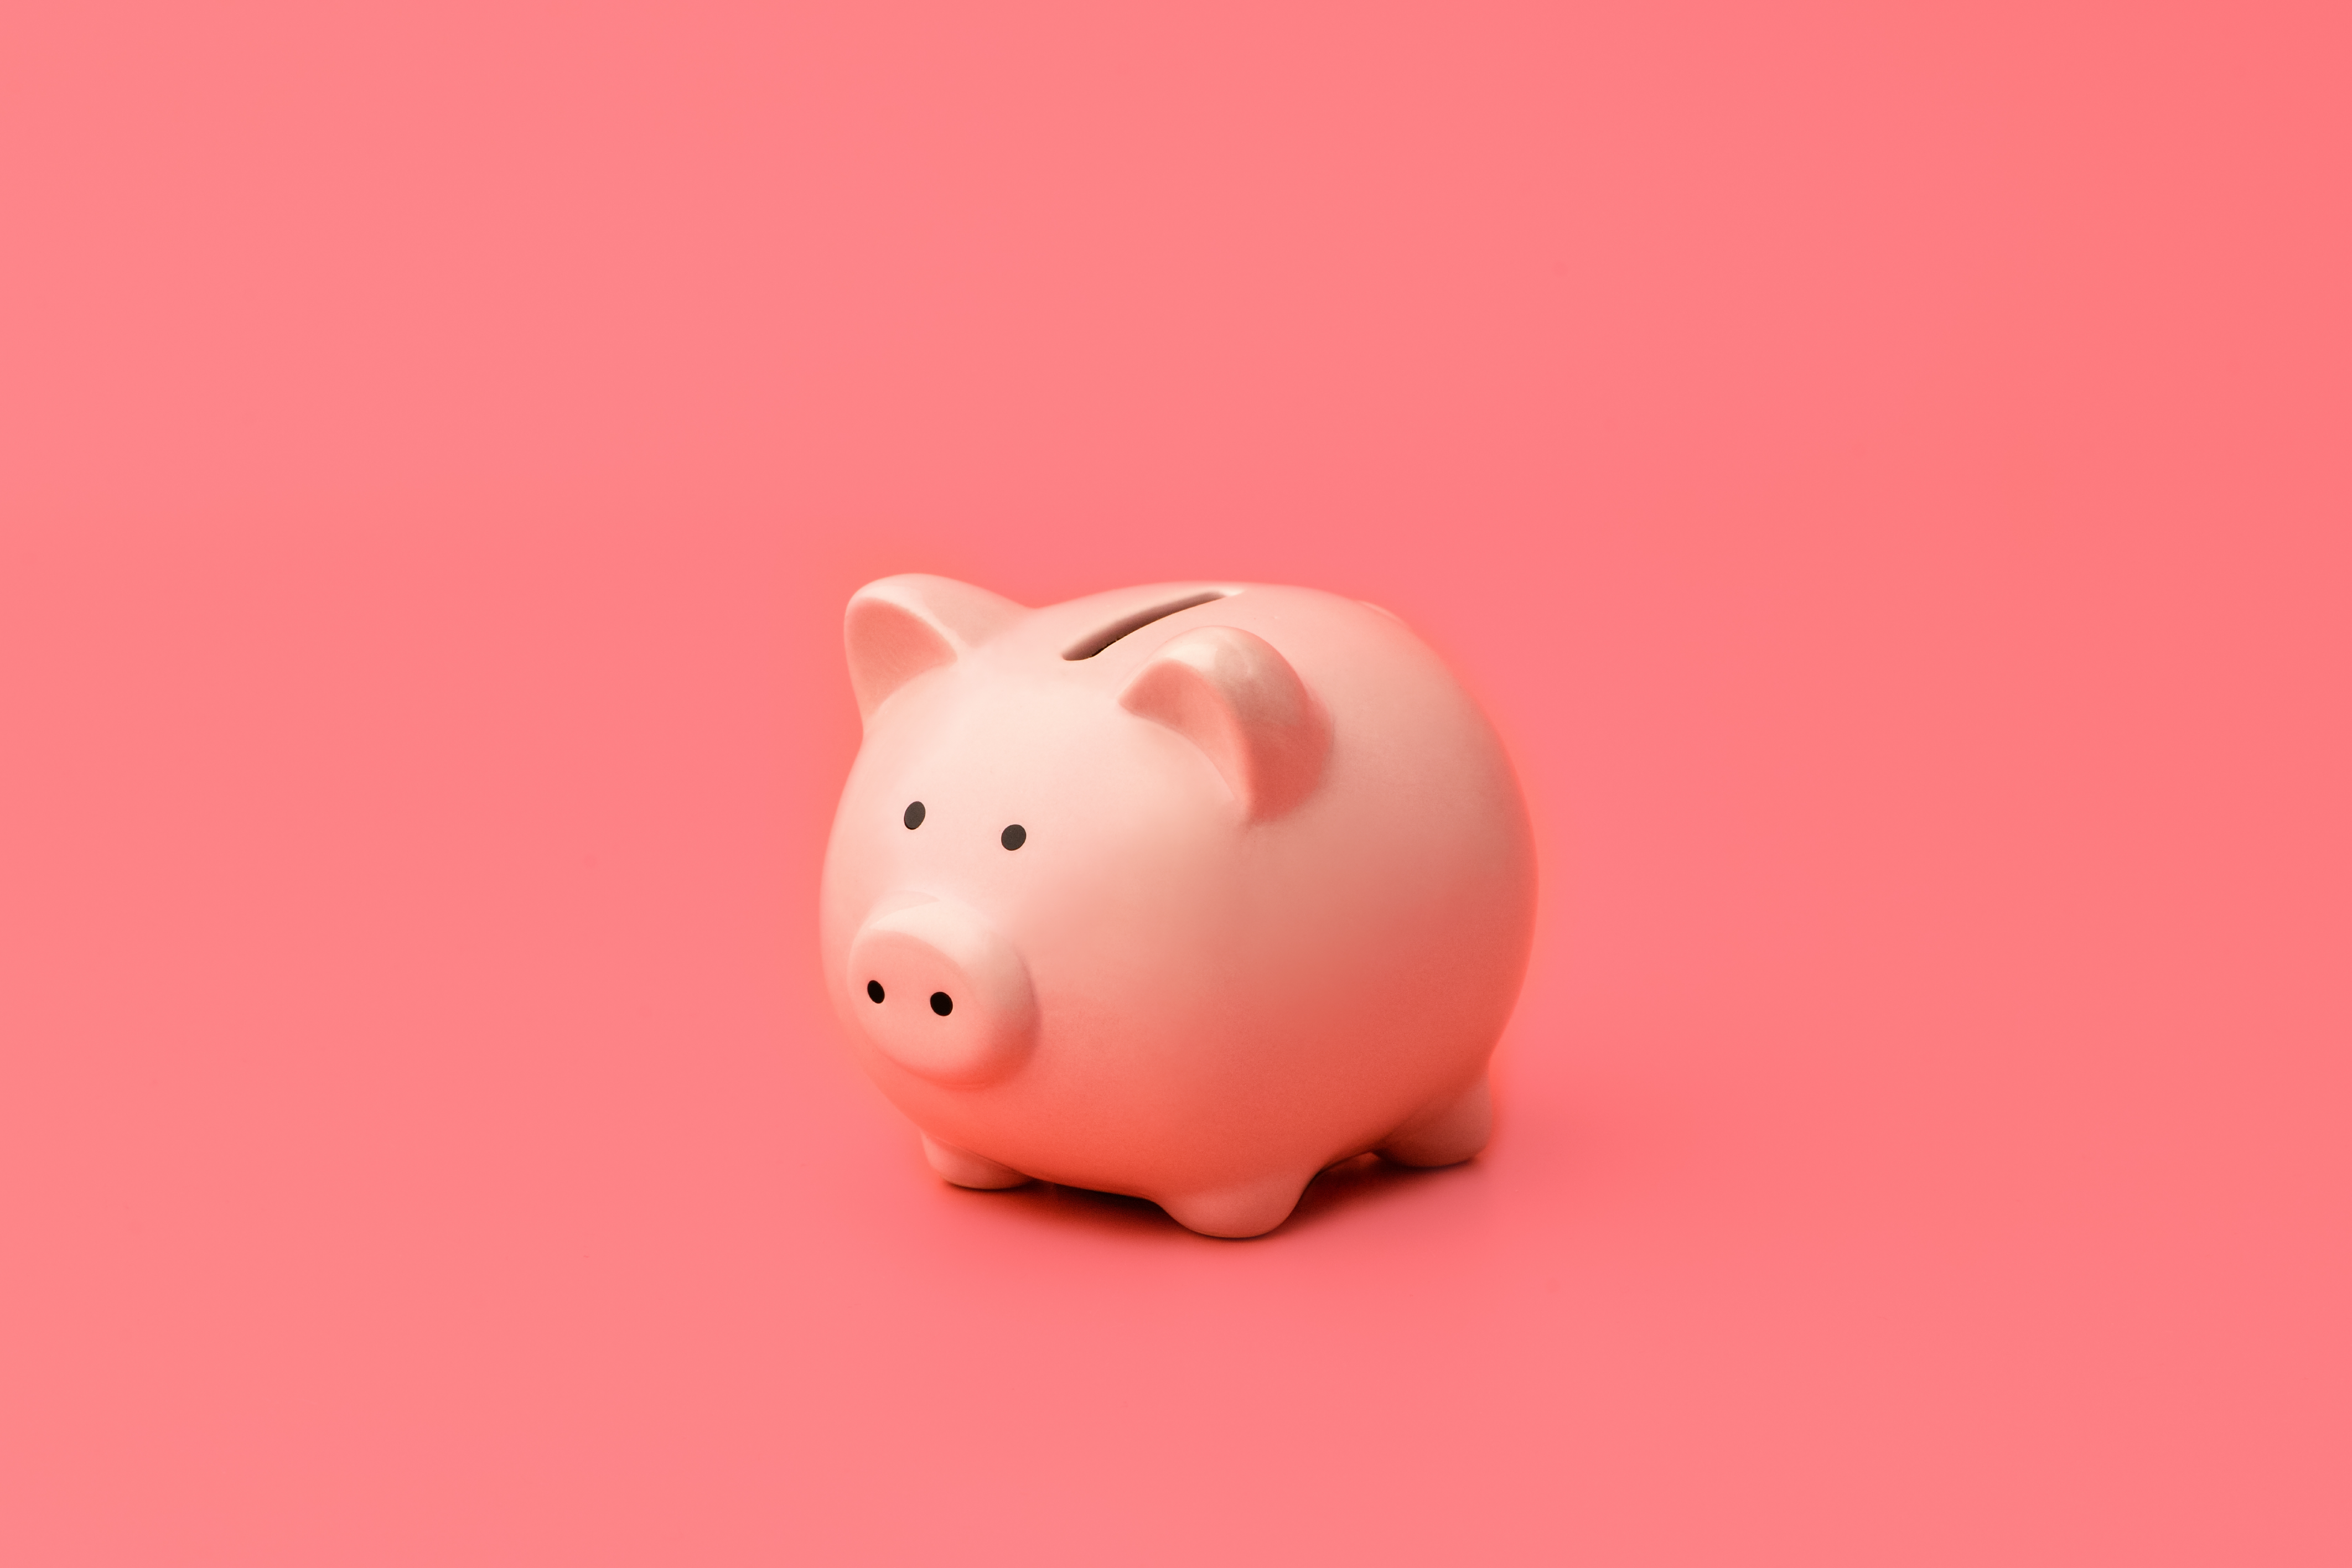 A pink piggy bank on a pink background, symbolizing Graphic Design Budget strategies for Small Business Graphic Design.